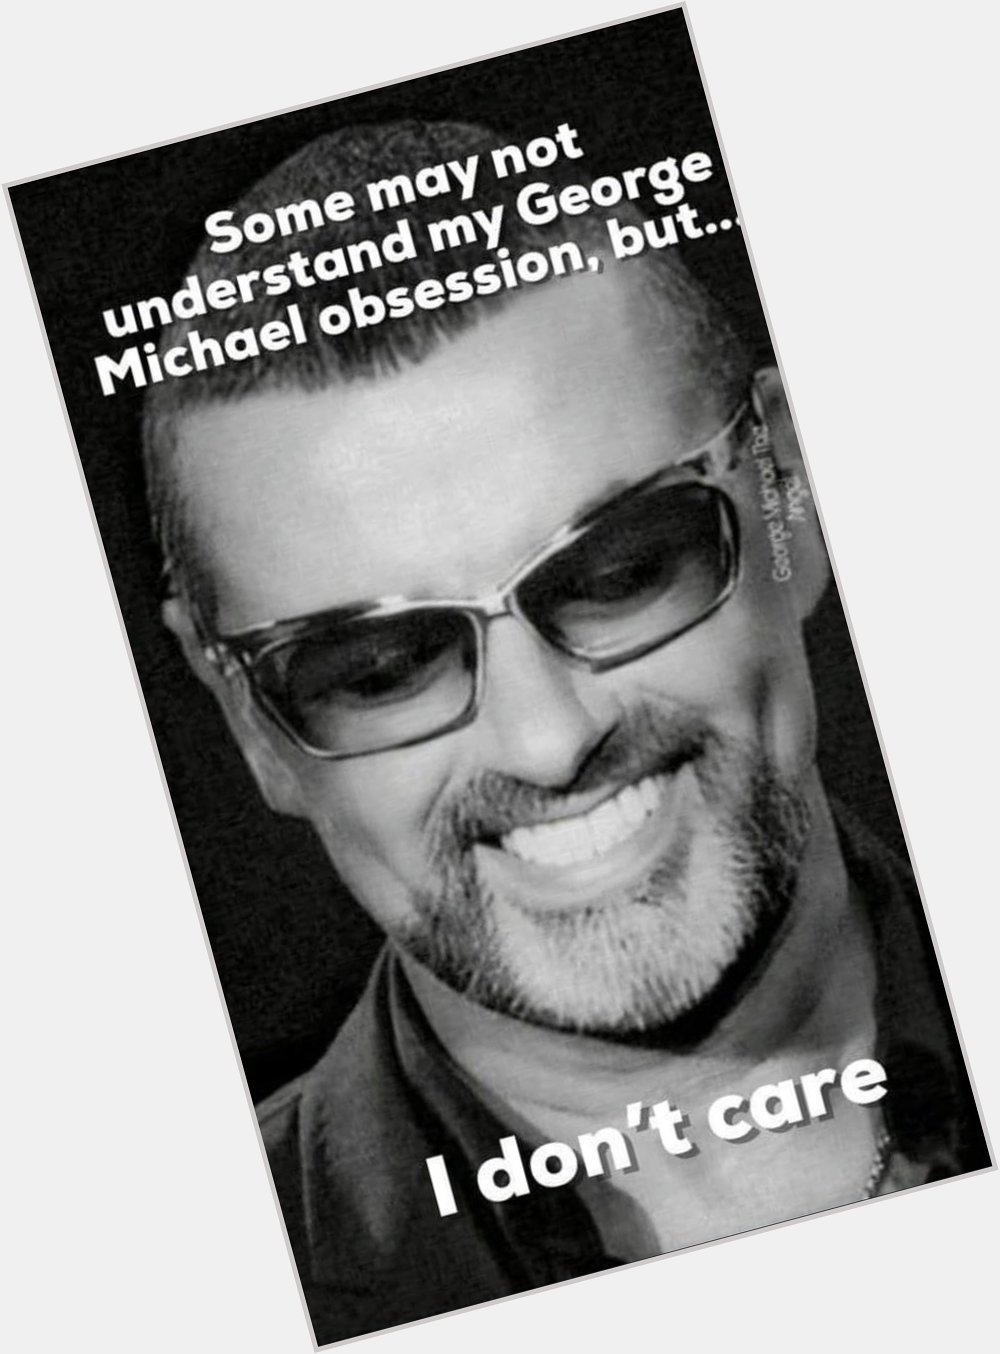 Happy heavenly birthday to the one and only George Michael   